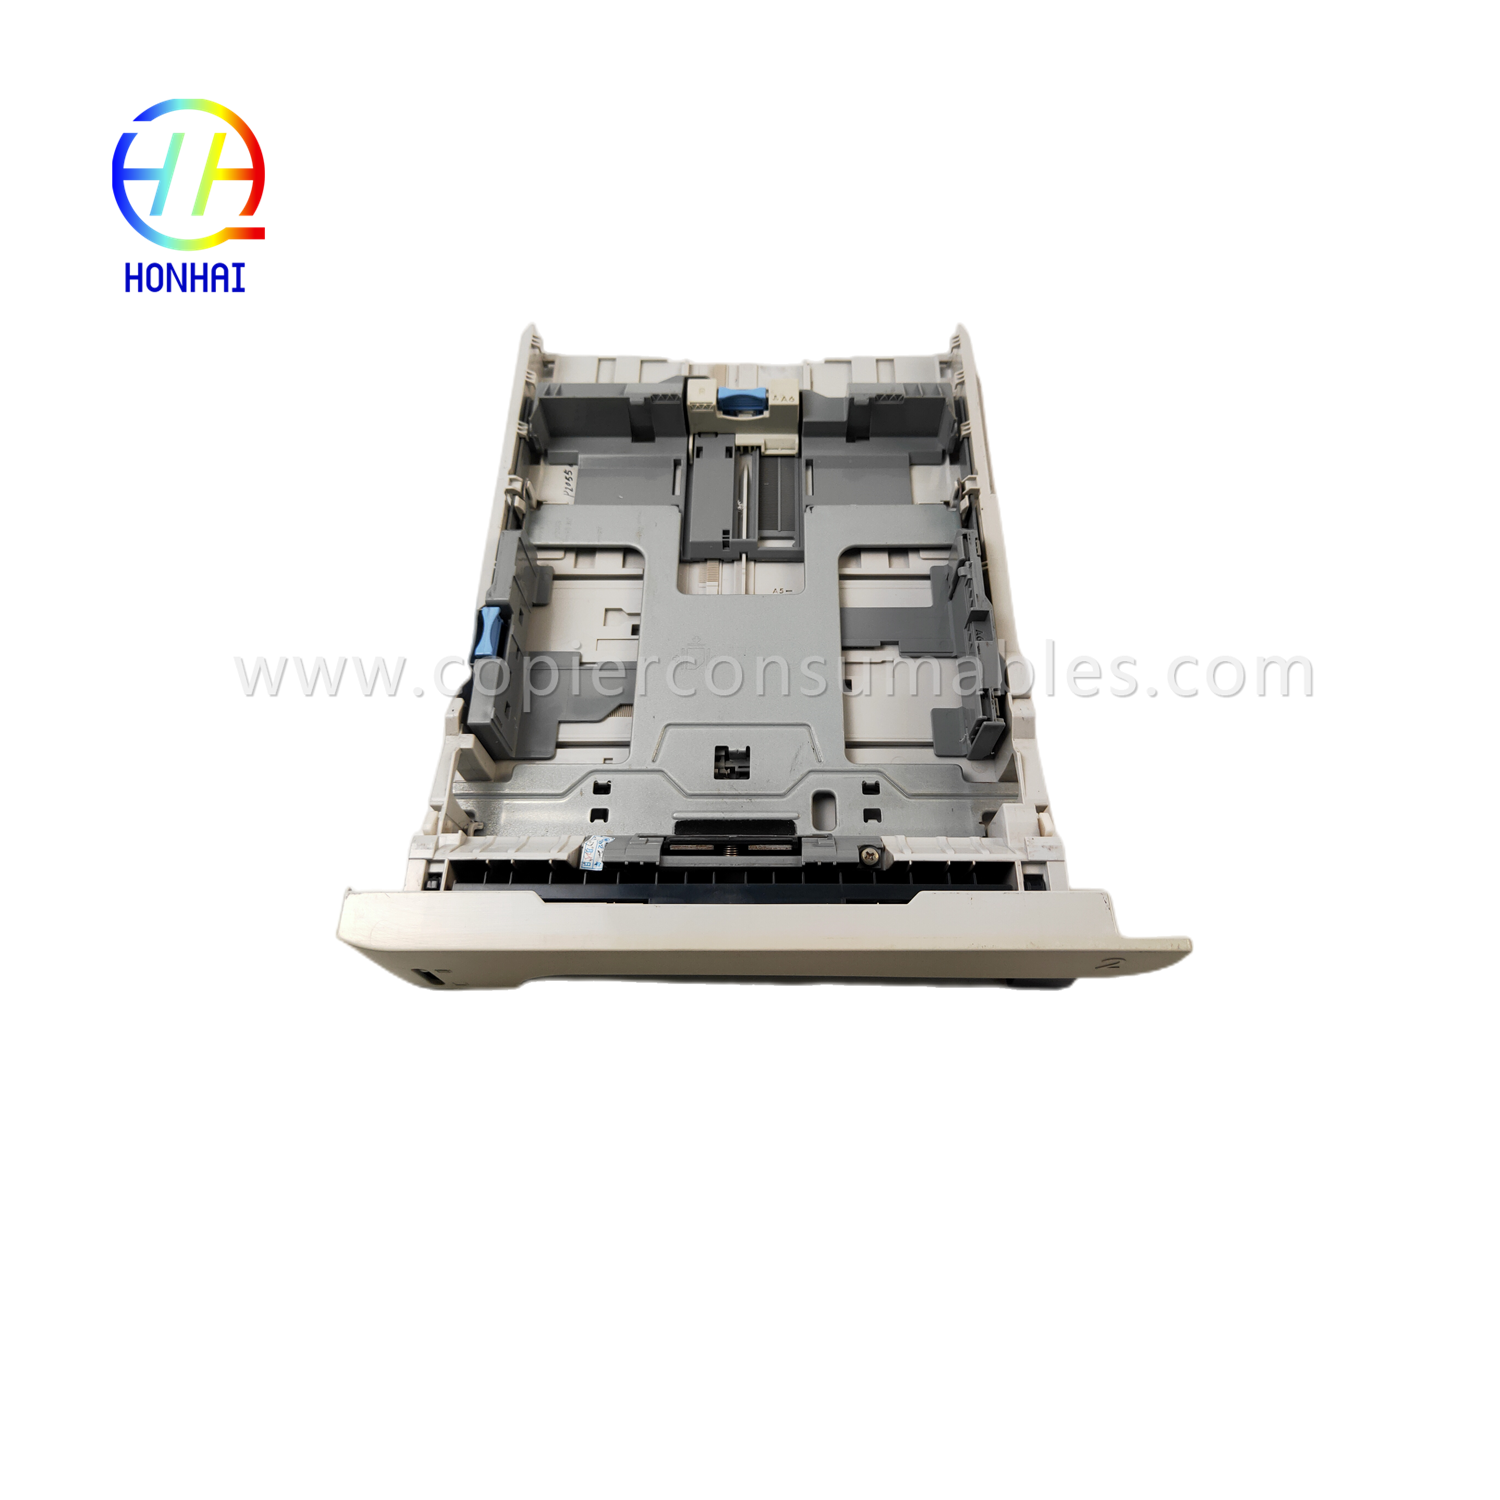 Paper Tray for HP P2035 P2055 RM1-6394-000 Printer Second Tray